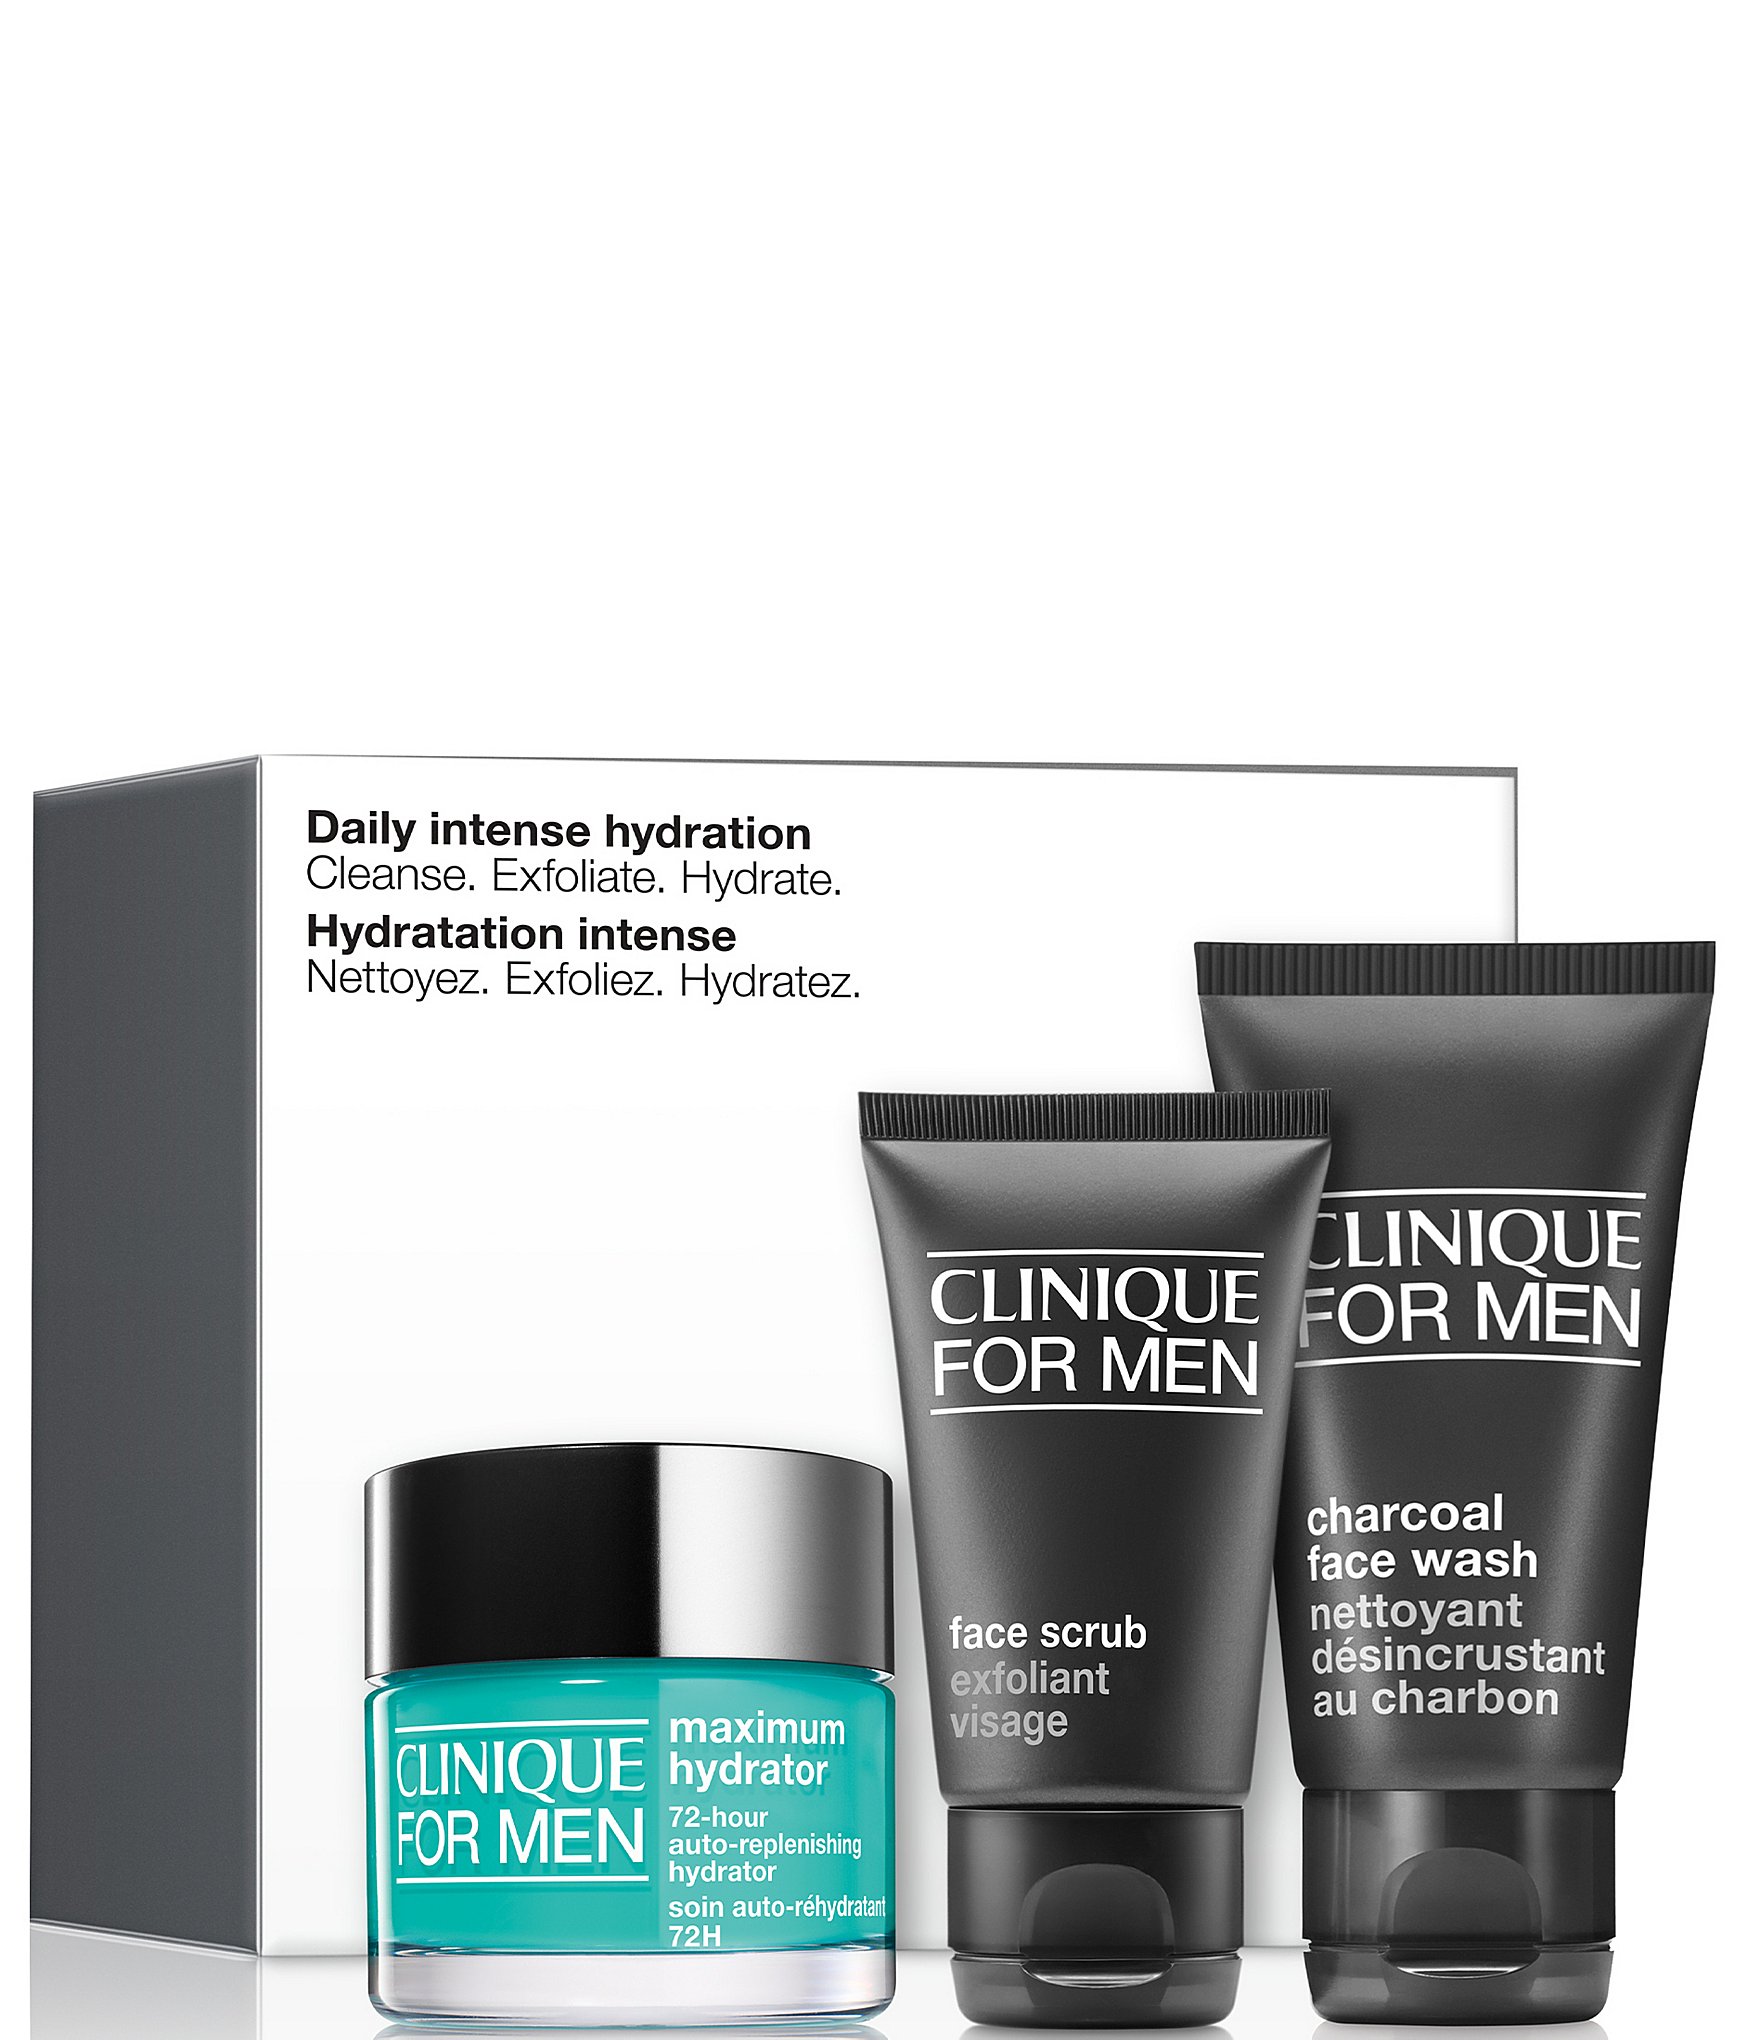 Clinique Daily Intense Hydration for Men Dillard's